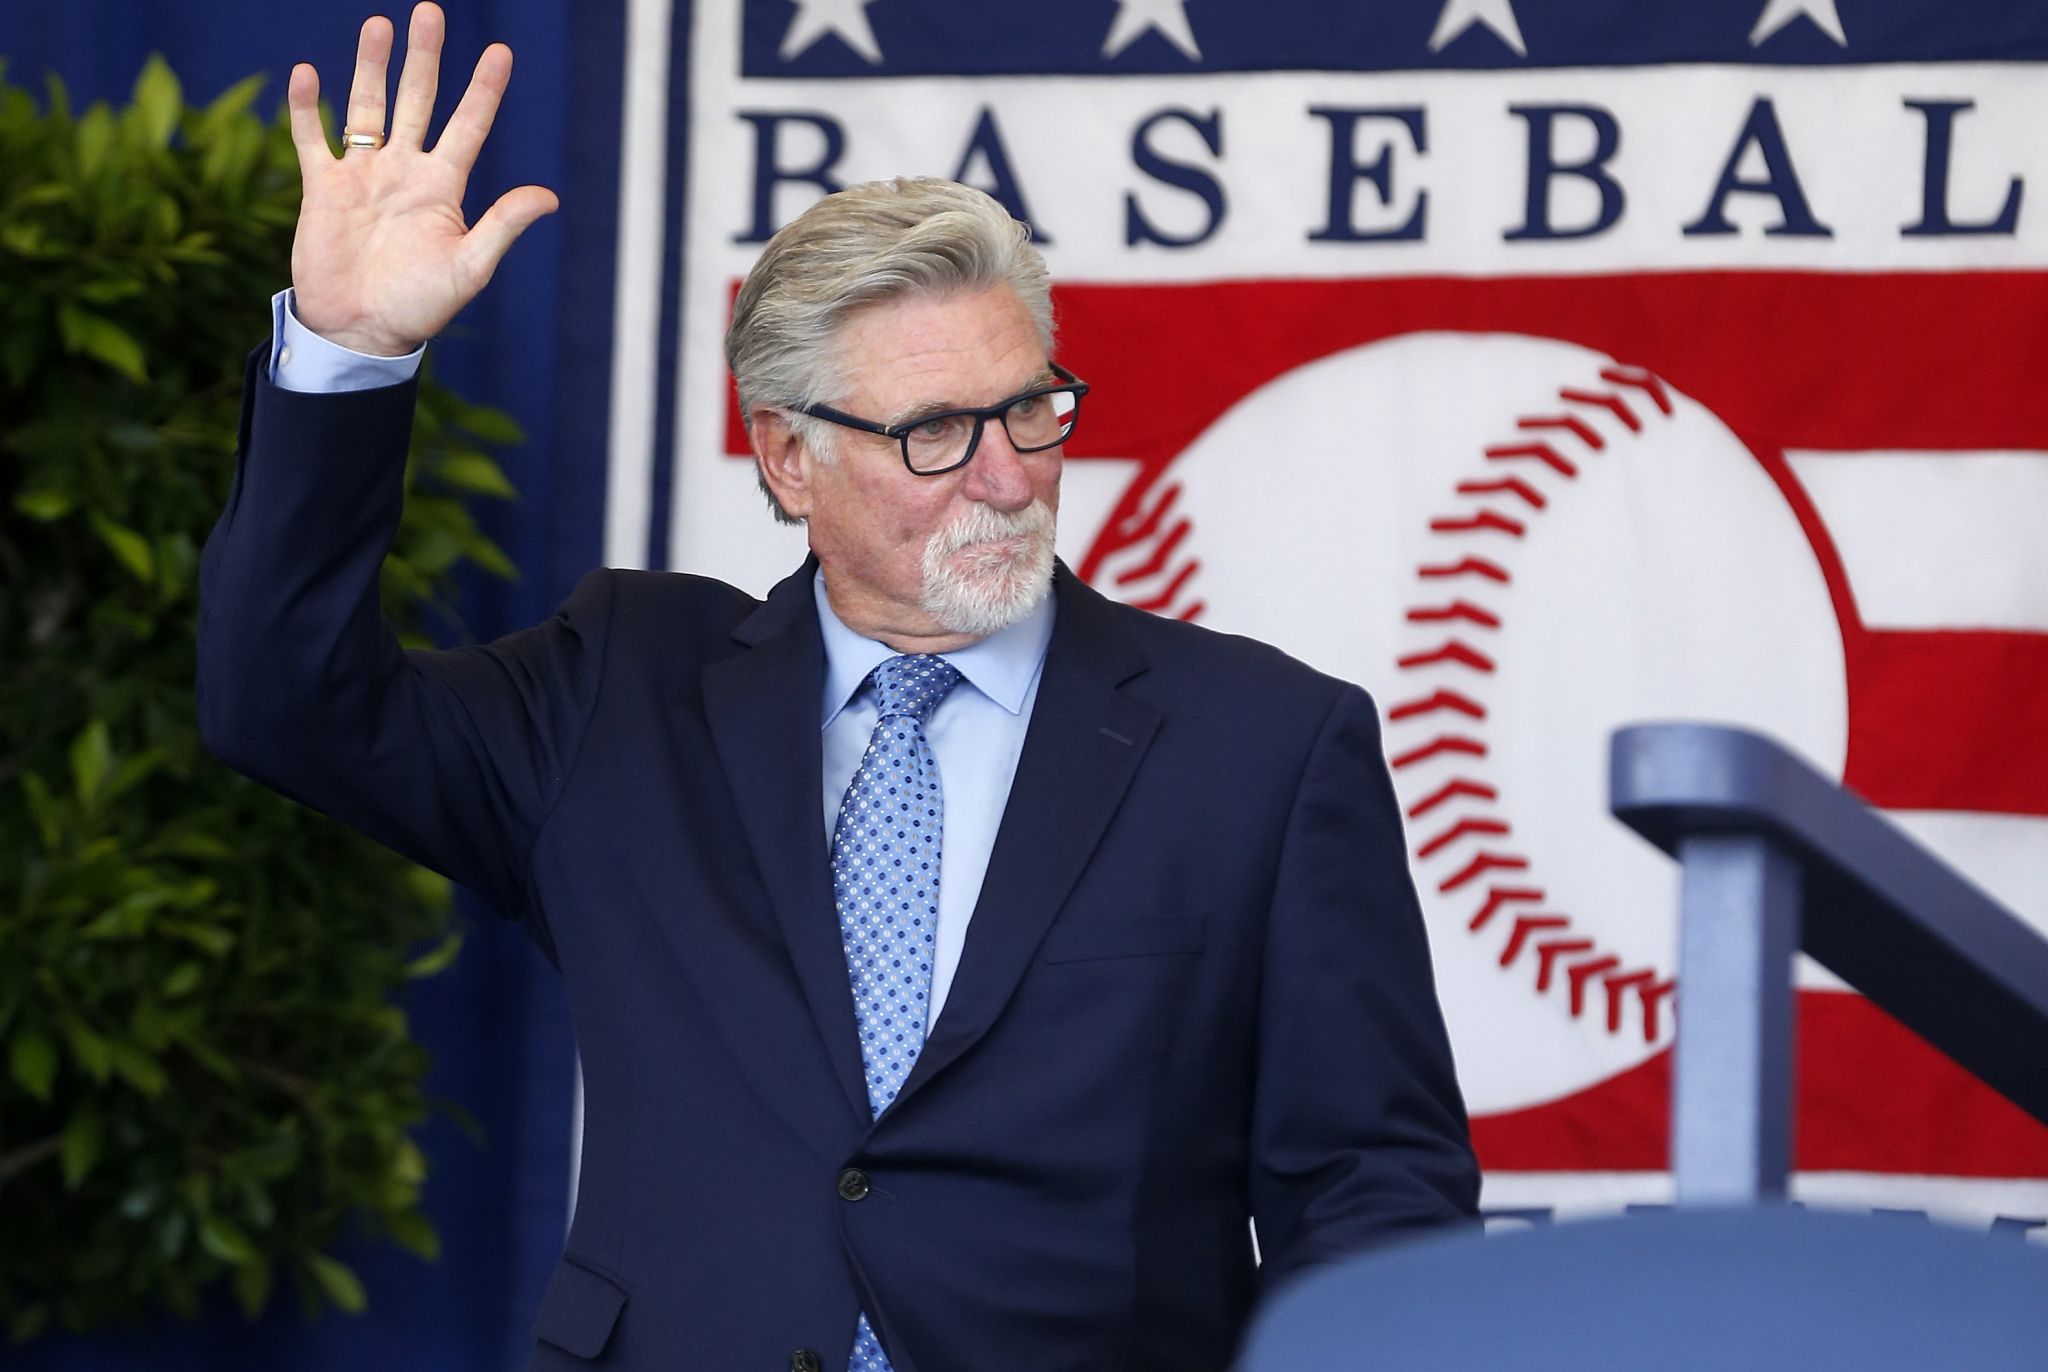 Detroit Tigers broadcaster Jack Morris suspended indefinitely from TV  broadcasts - Bless You Boys